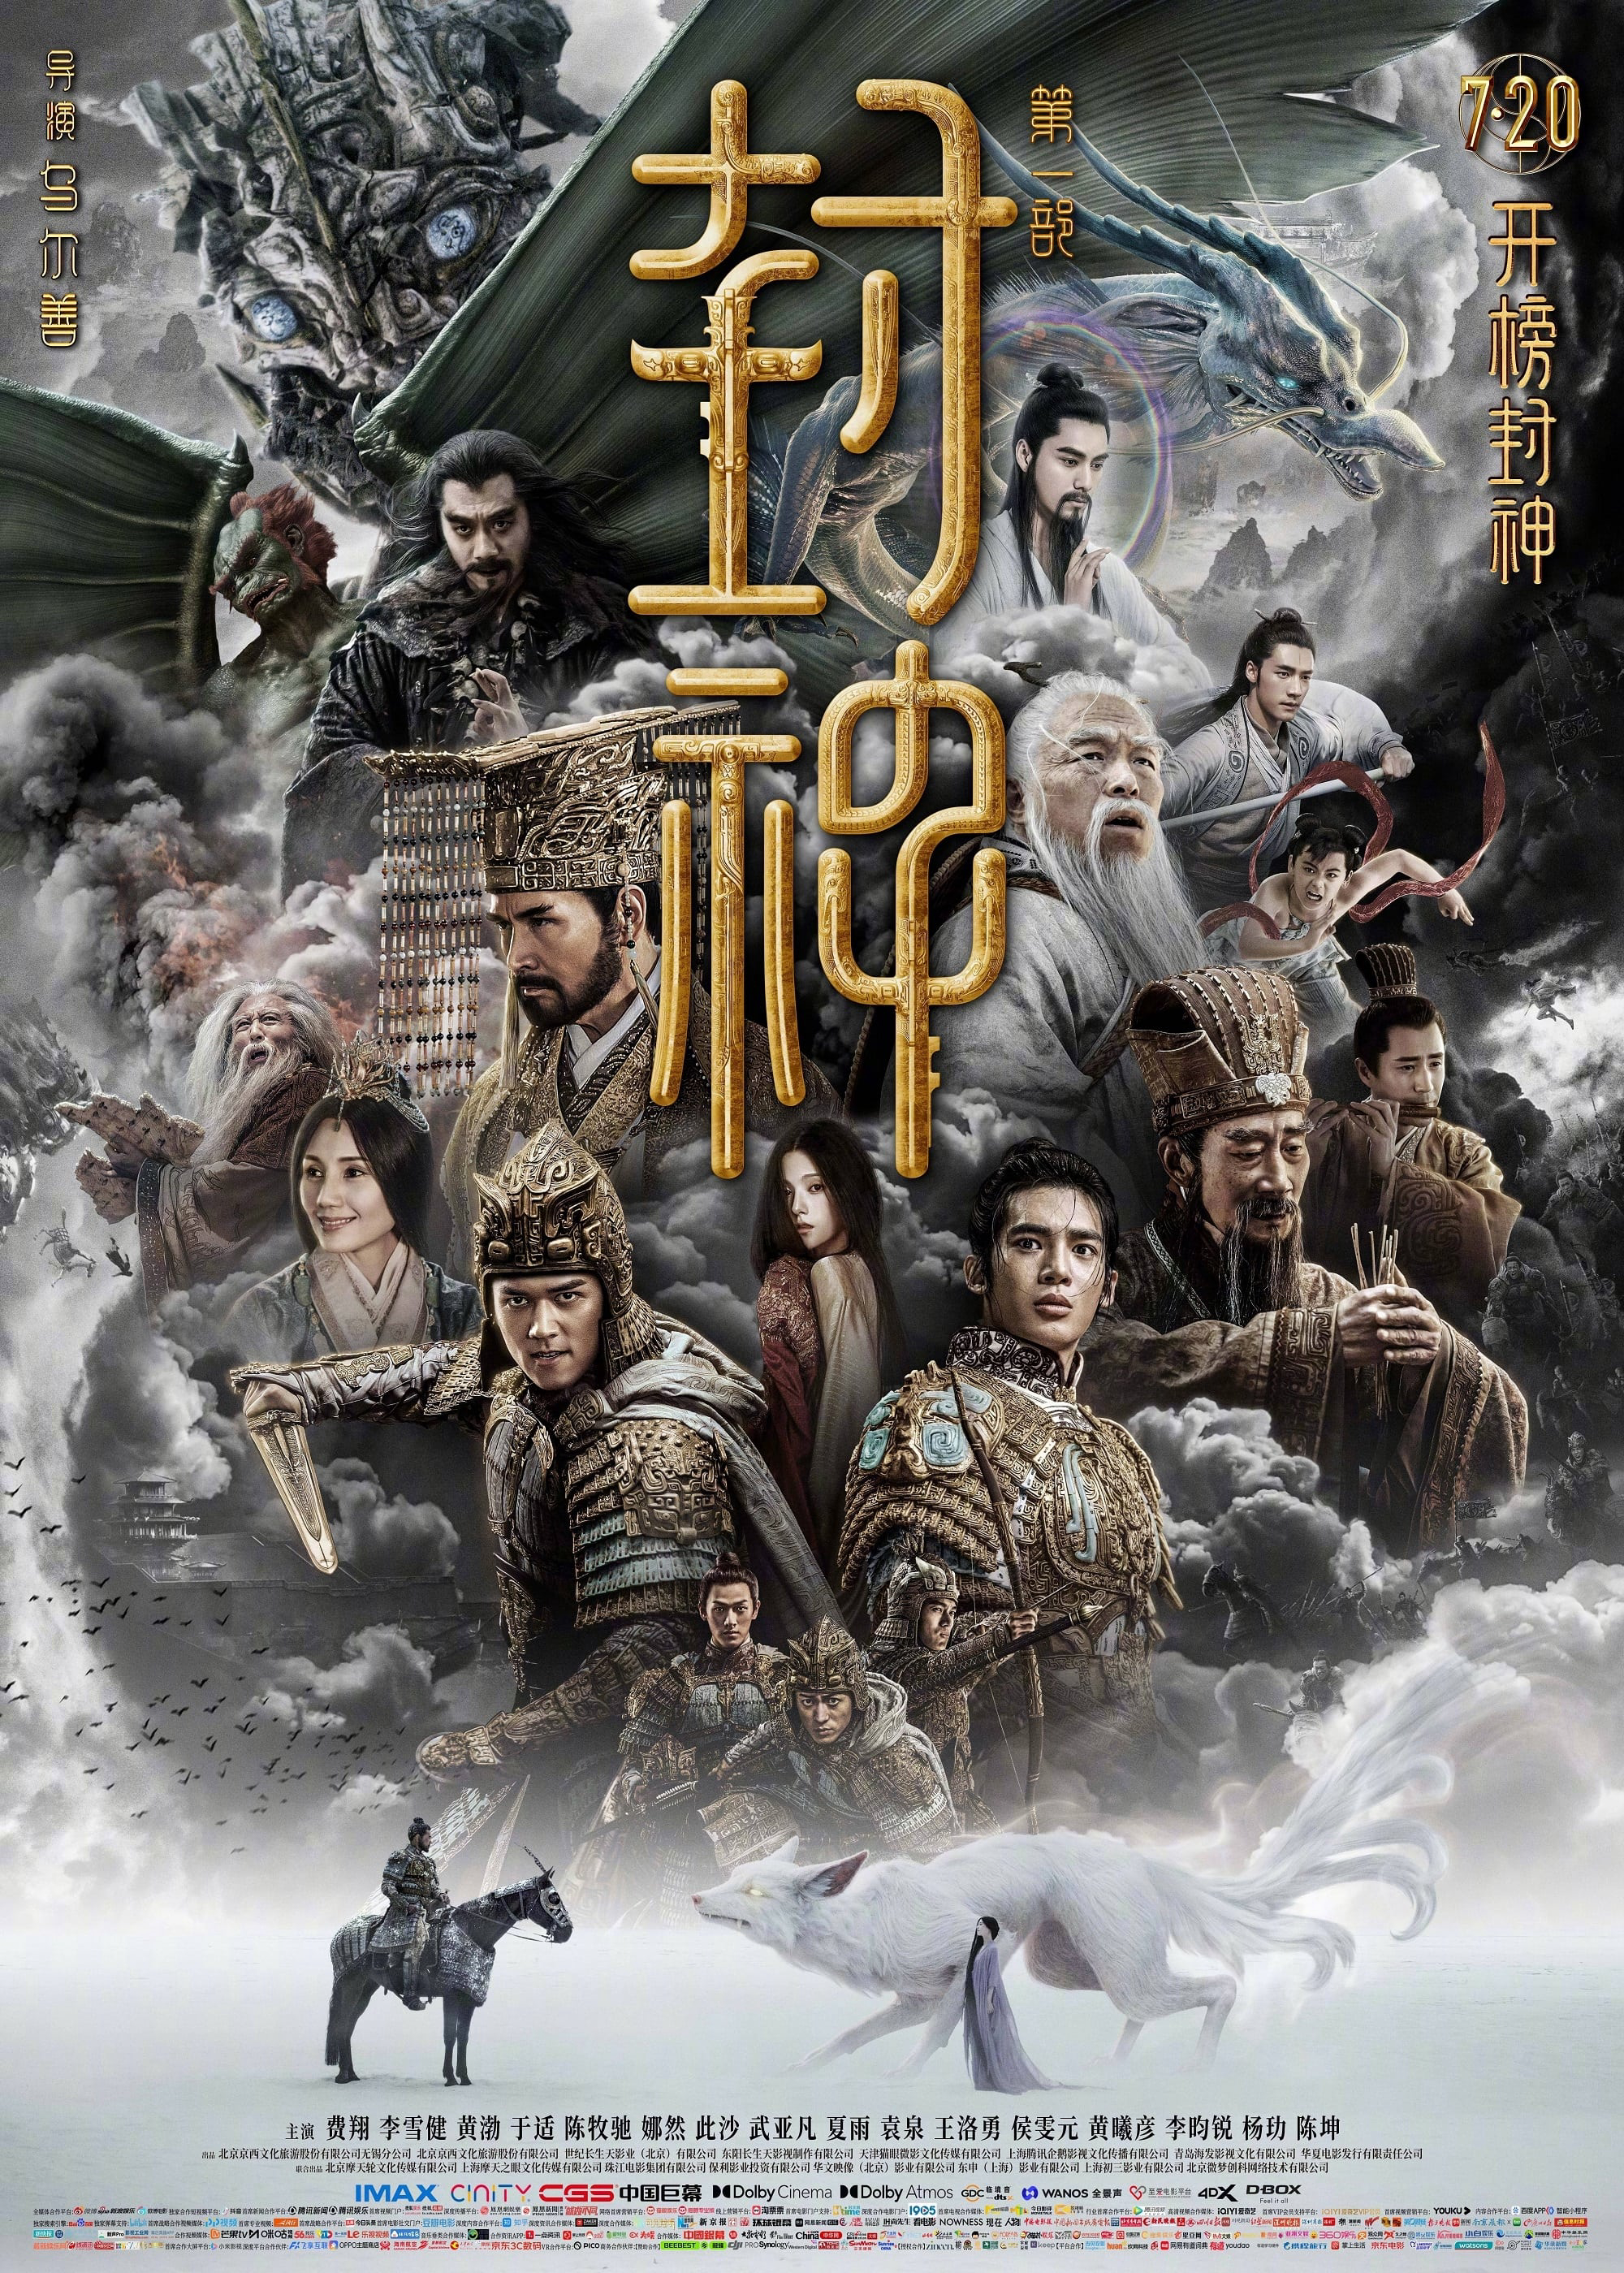 Poster Phim Phong Thần 1: Tam Bộ Khúc (Creation of the Gods 1: Kingdom Of Storms)